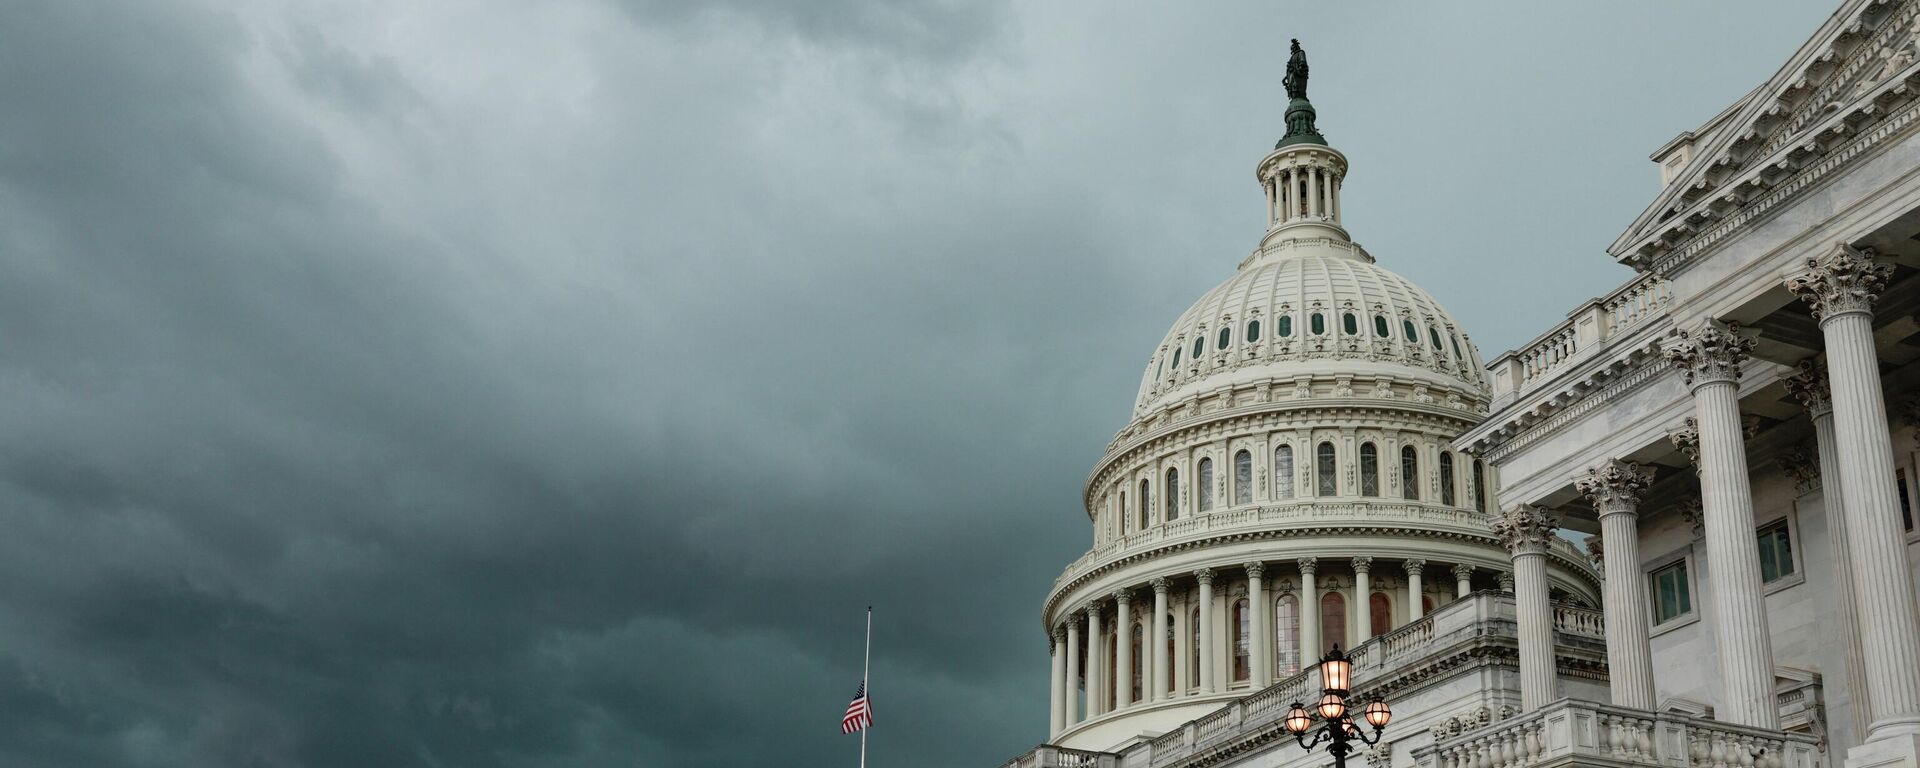 A storm cloud hangs over the U.S. Capitol Building on May 16, 2022 in Washington, DC. - Sputnik International, 1920, 17.05.2022